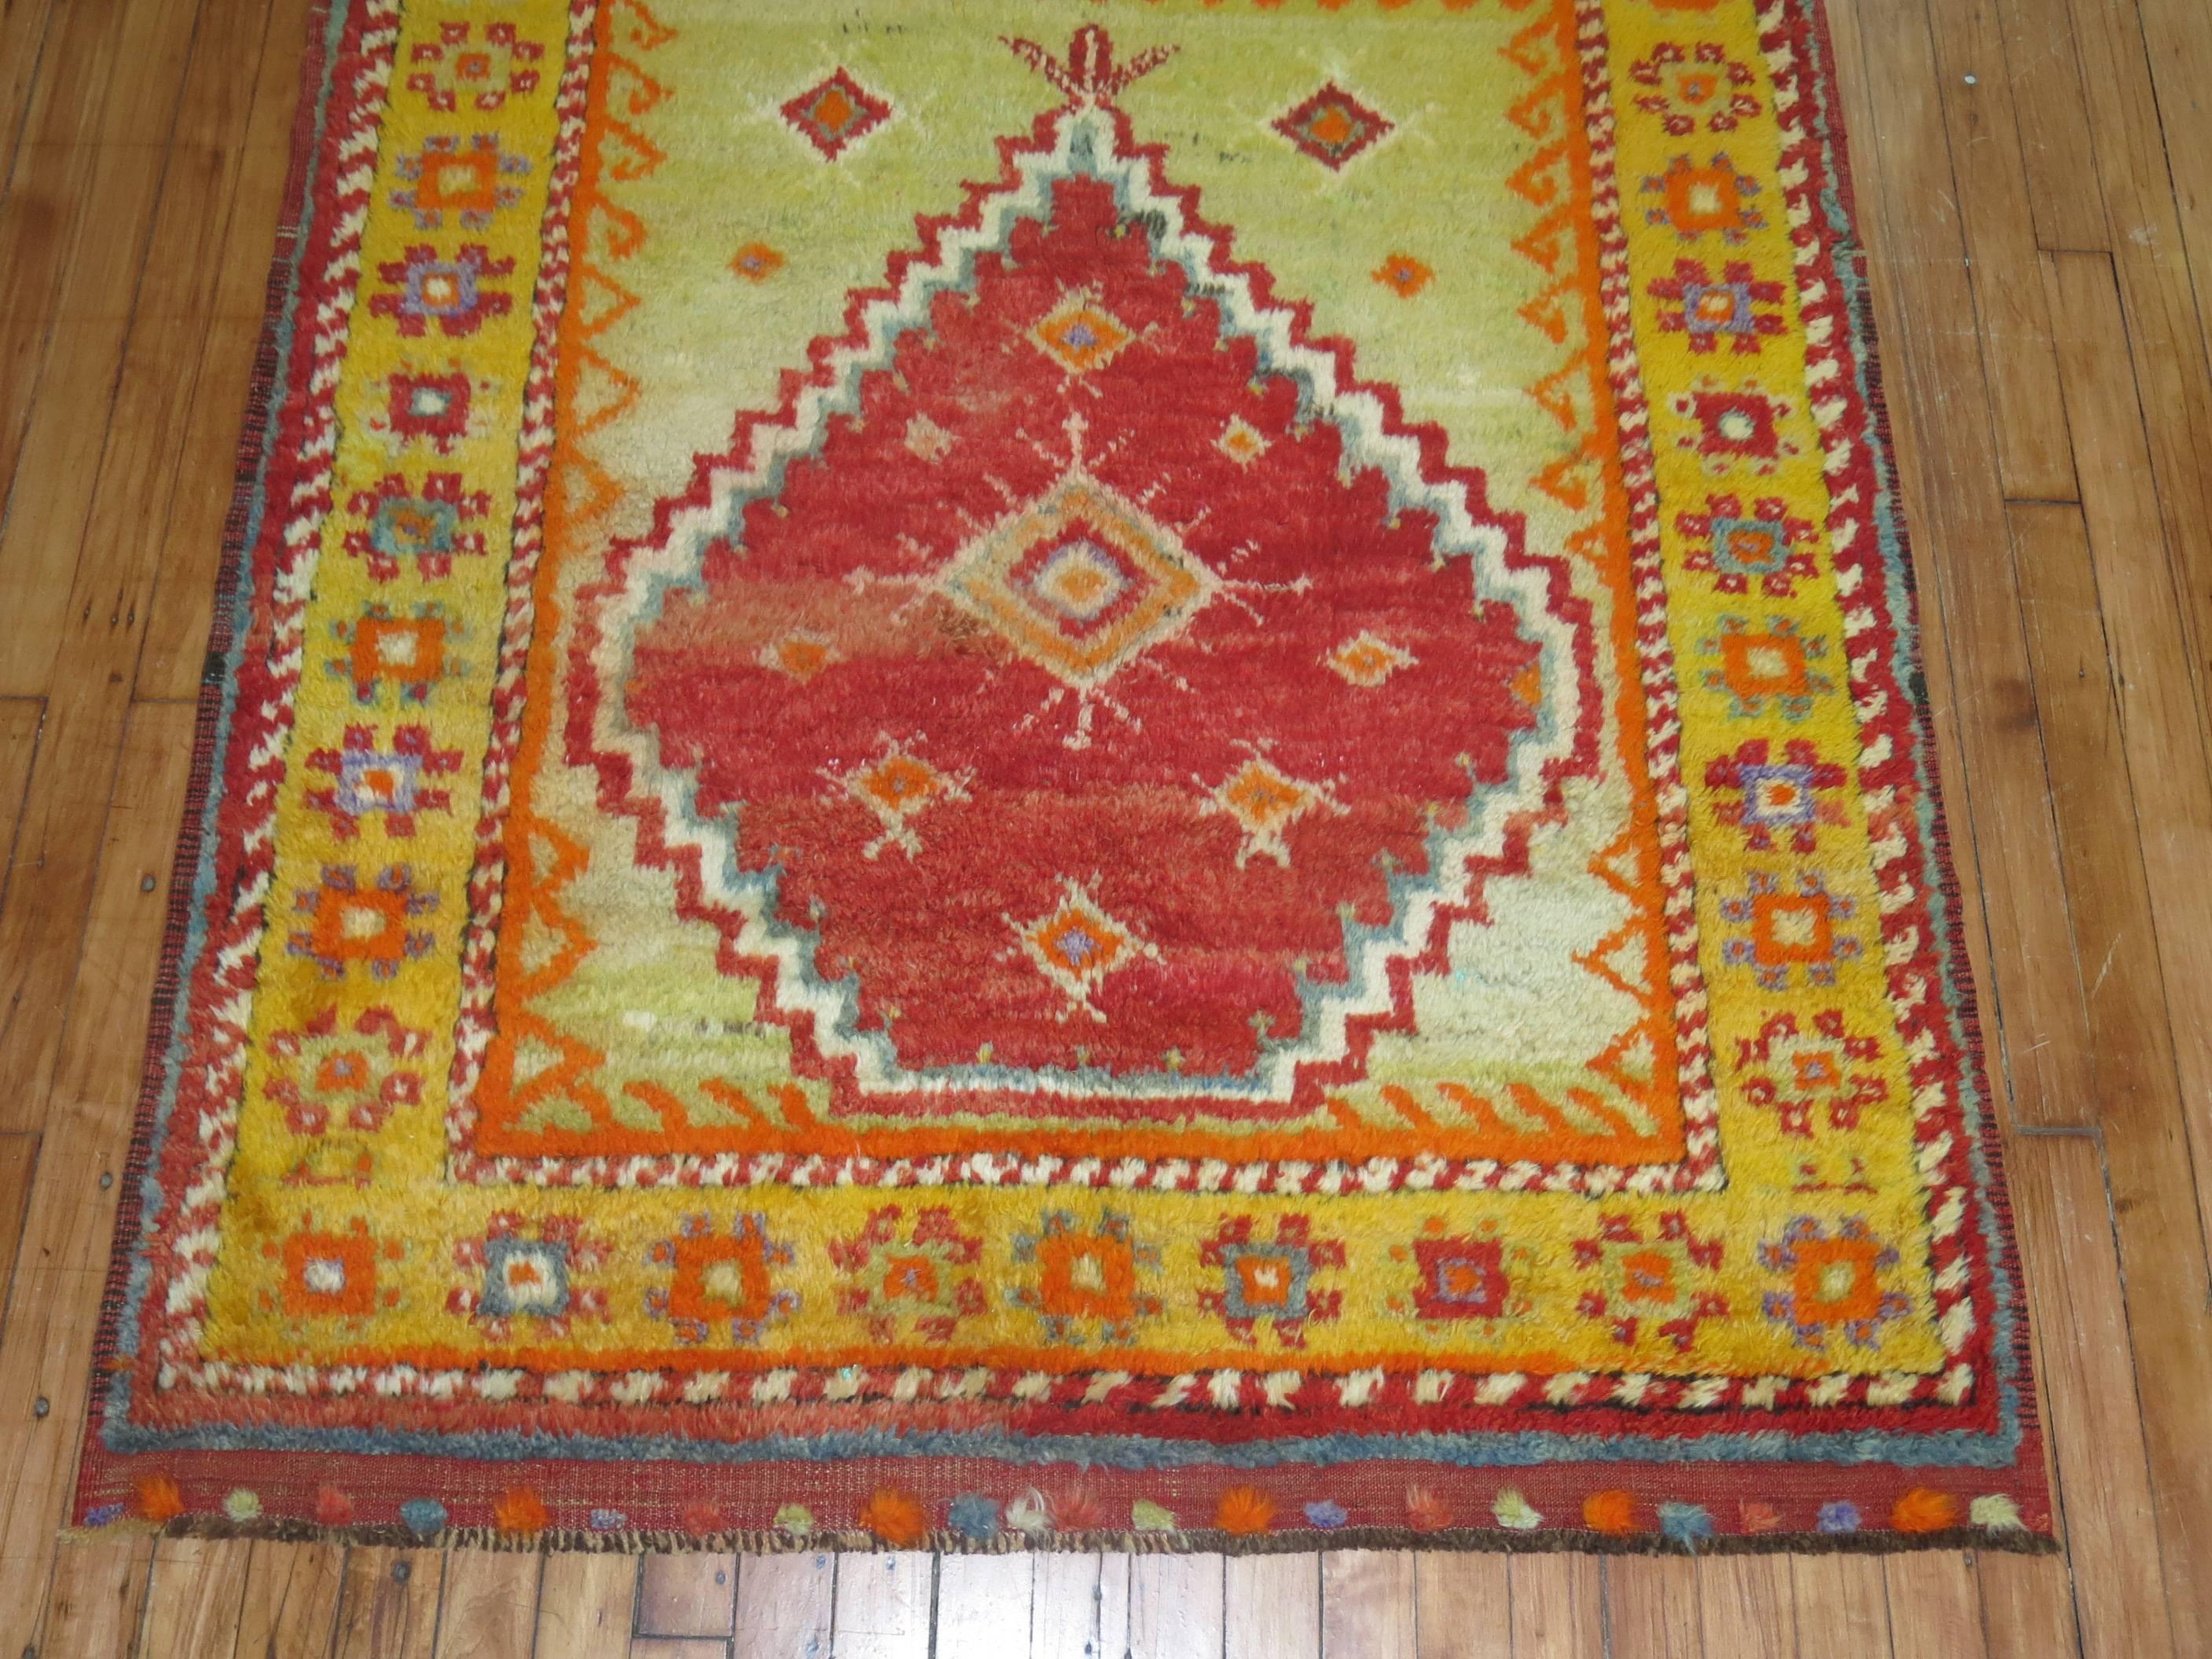 A Turkish Tulu prayer rug with saturated colors in predominant red. Lime green and orange tones

Measures: 4' x 4'9